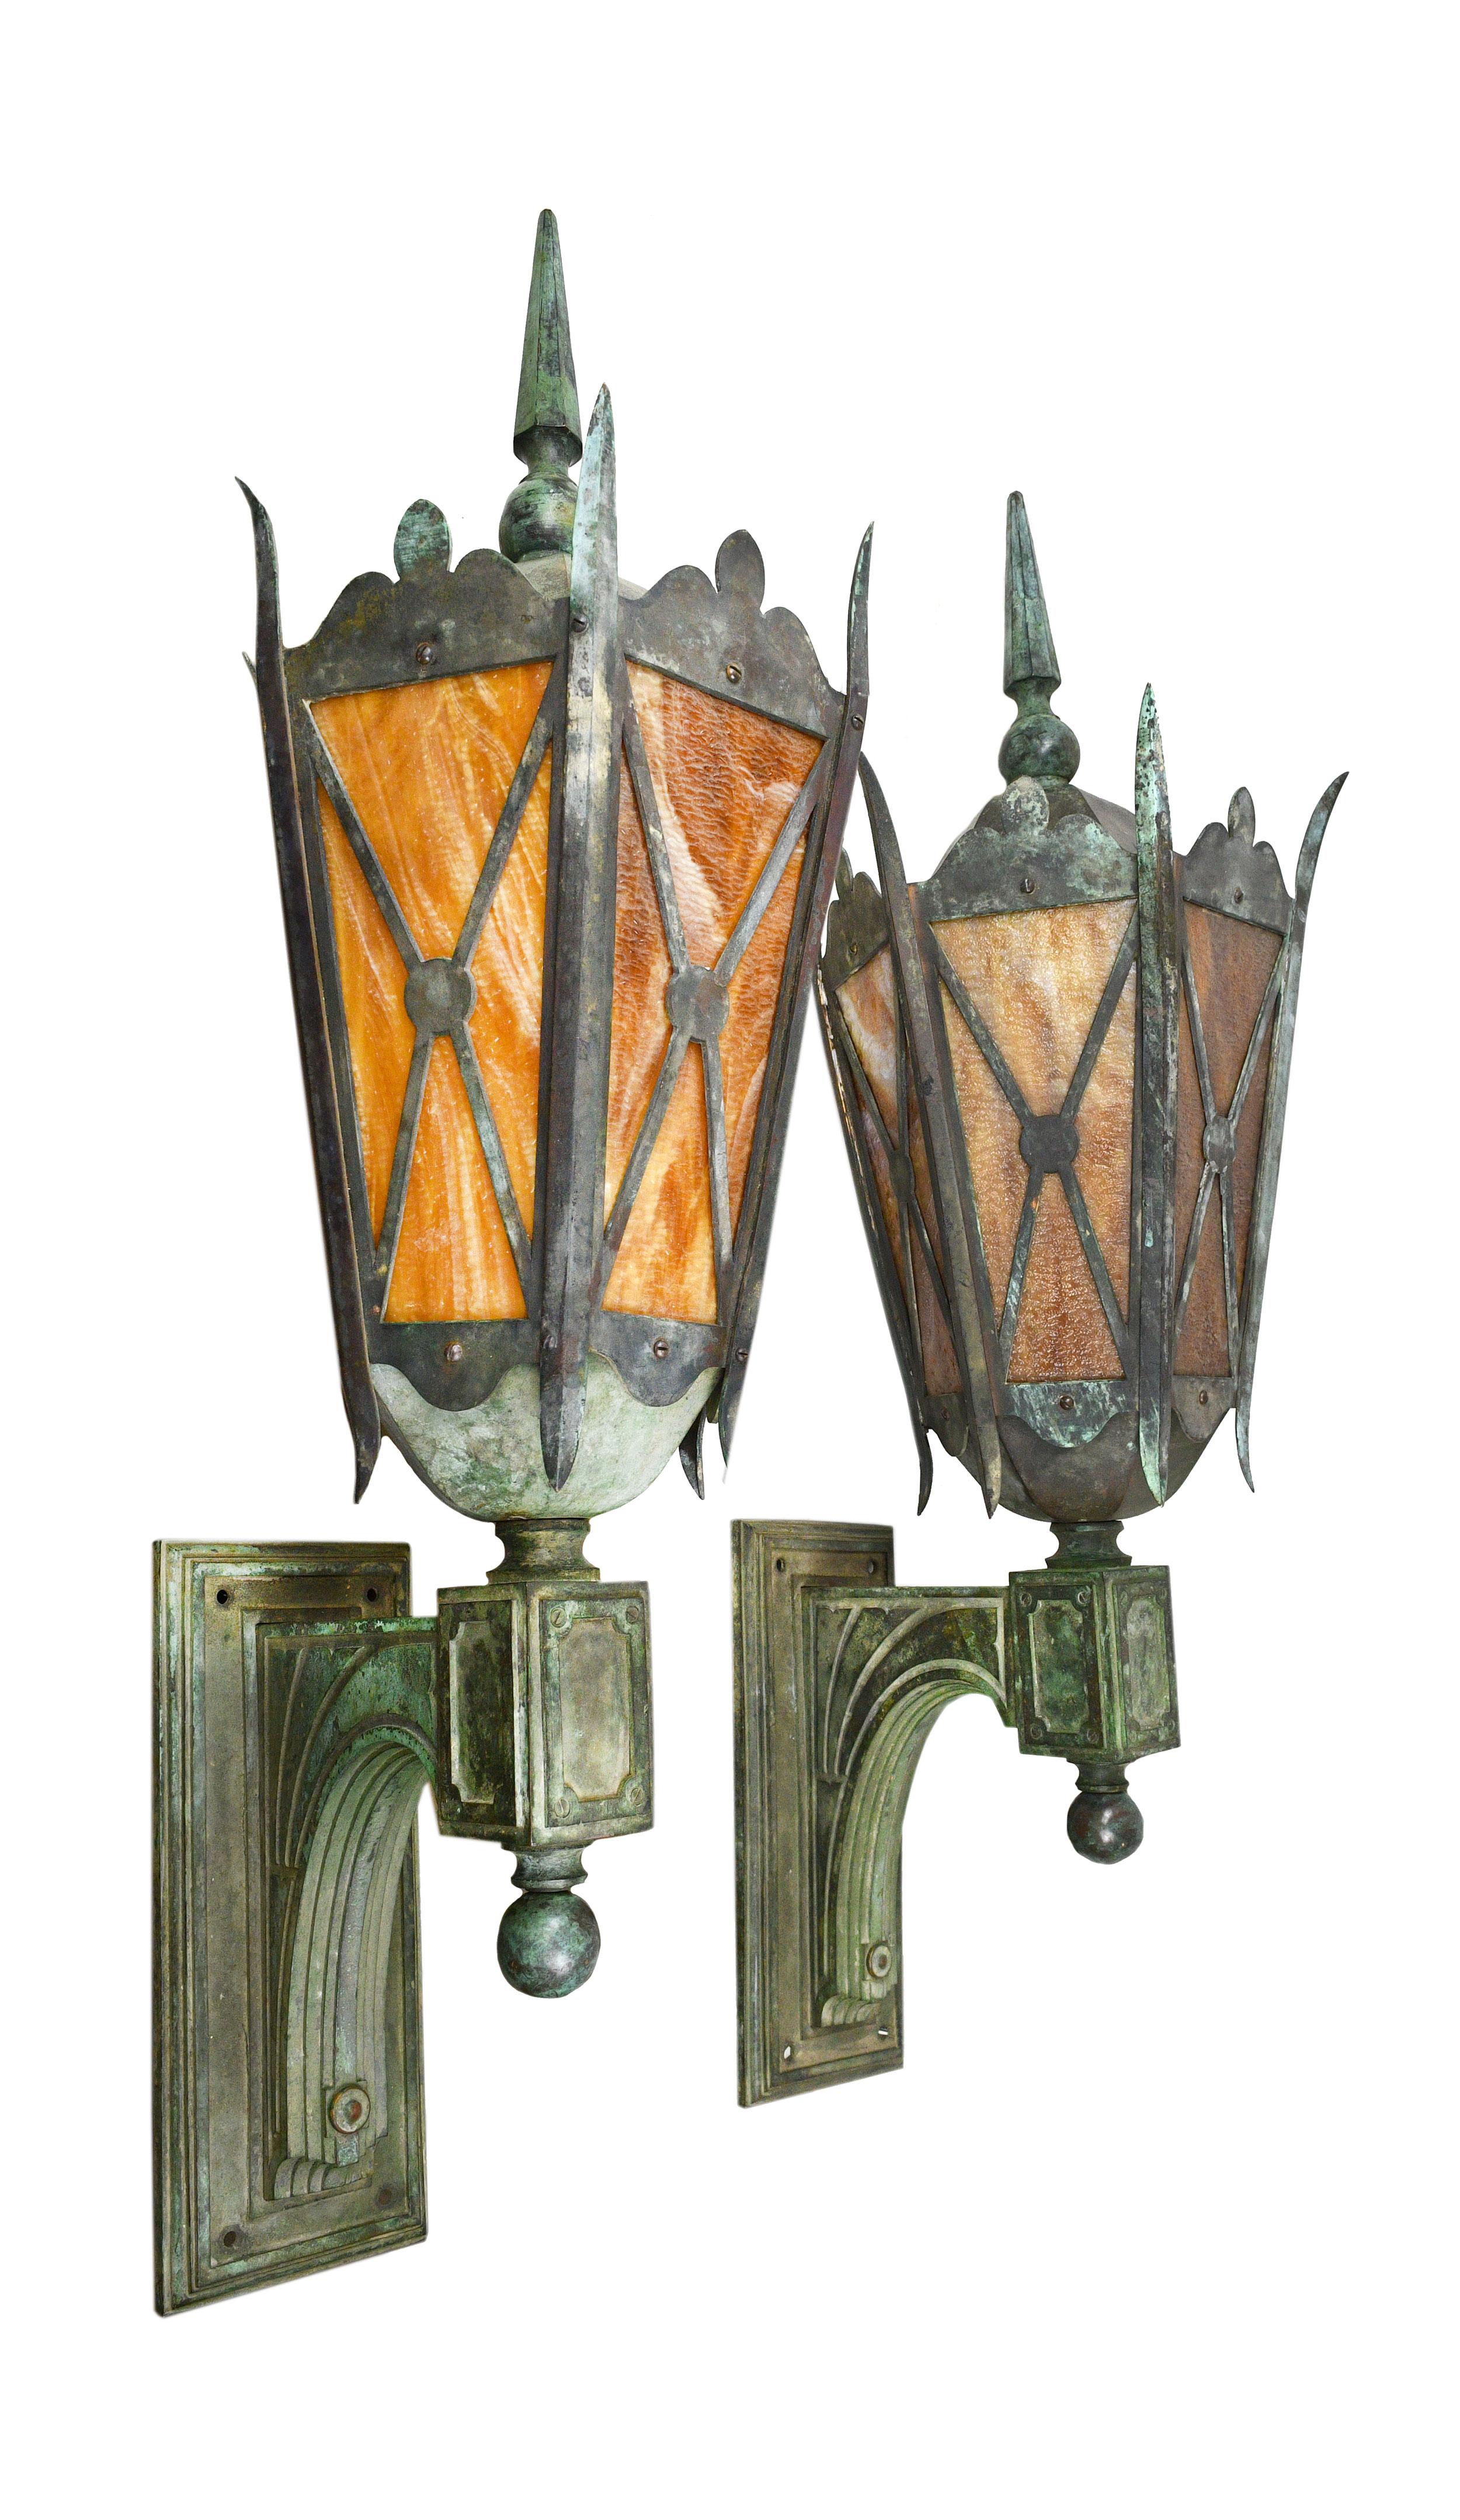 This magnificent pair of exterior sconces with beautiful verdigris patina features a simple lines, curving or angled in all parts except for the connecting elements of the back plate and arm to lantern. Six panes of lovely caramel slag glass give